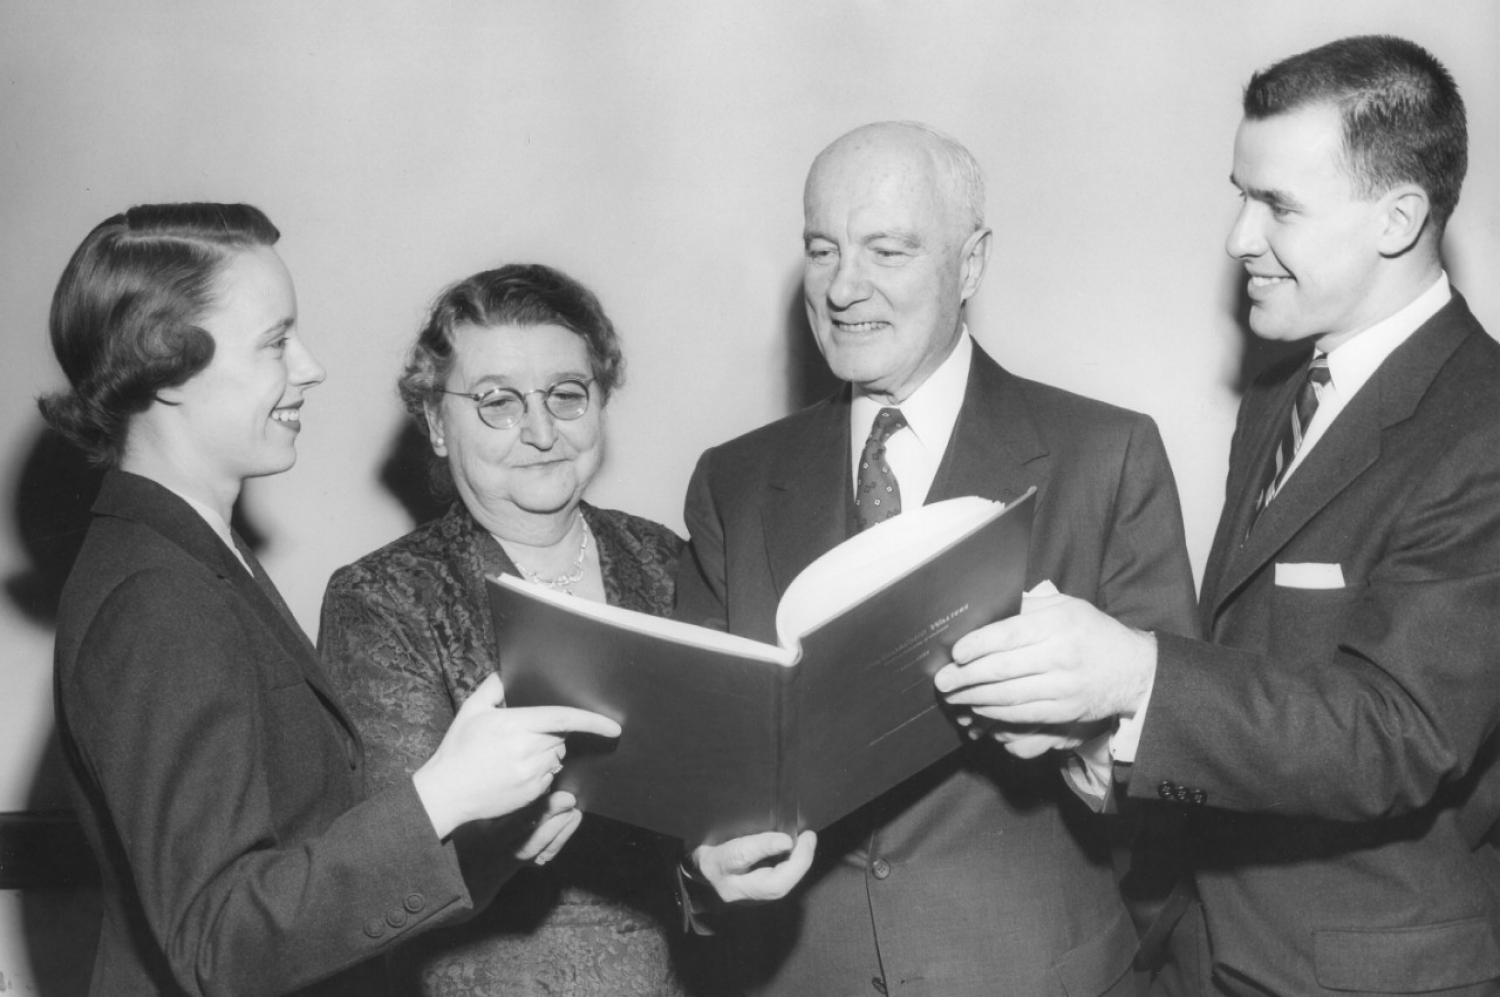 From the left: Shirley Parsons, Mrs. Raymond Walters, Dr. Raymond Walters, Otto Budig. The Walters are presented with a signature book at Raymond Walters' student-sponsored retirement dinner in 1955.